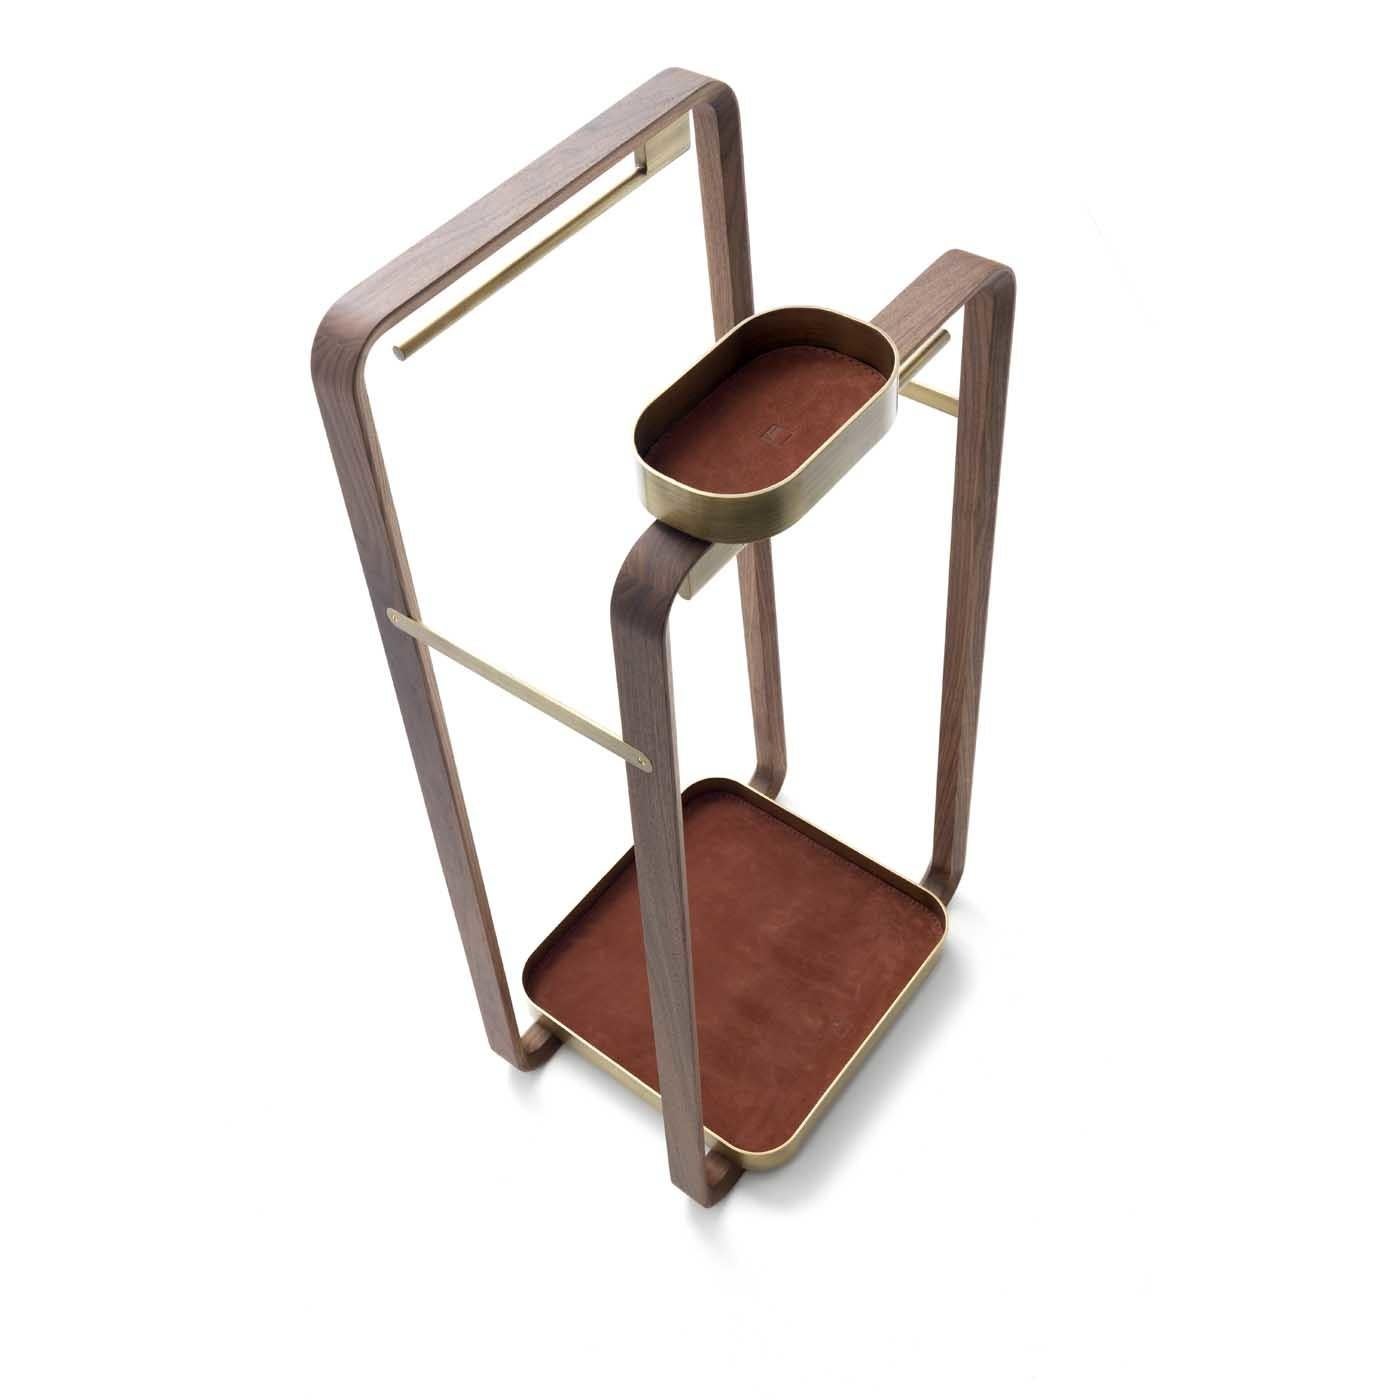 This valet stand is a versatile and precious addition to a contemporary decor, while also being a superbly decorative accent that will enliven a bedroom with its sculptural allure. The metal tray with a satin-brass finish at the base is upholstered